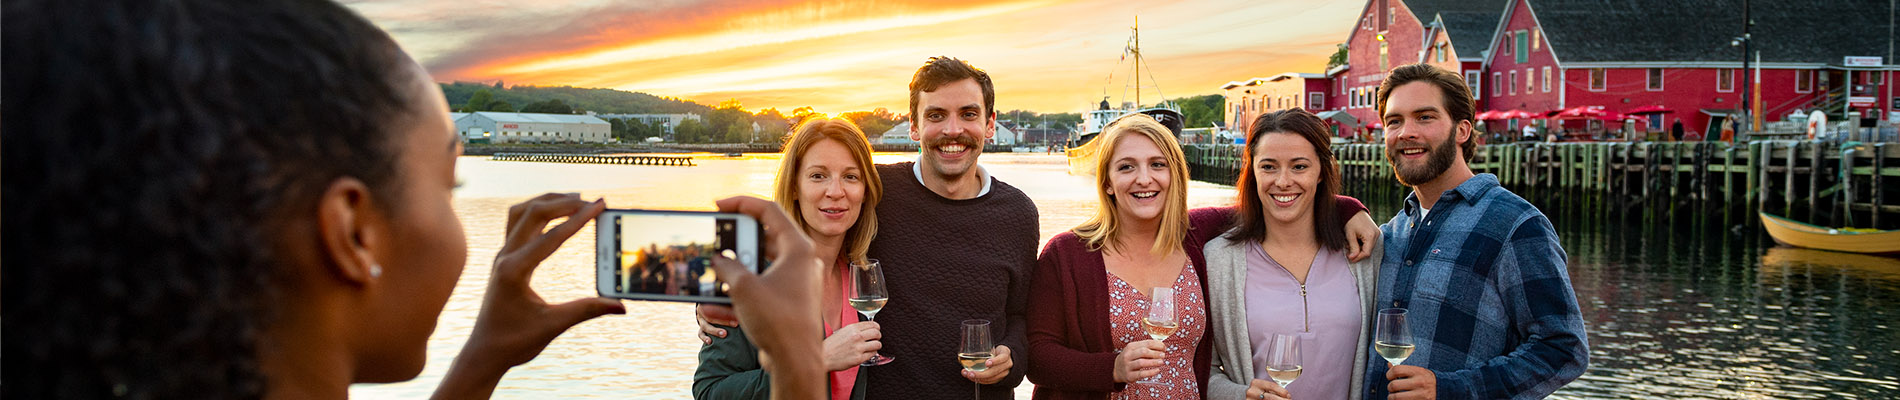 Friends take a Wharf front group Picture with Glasses of Wine